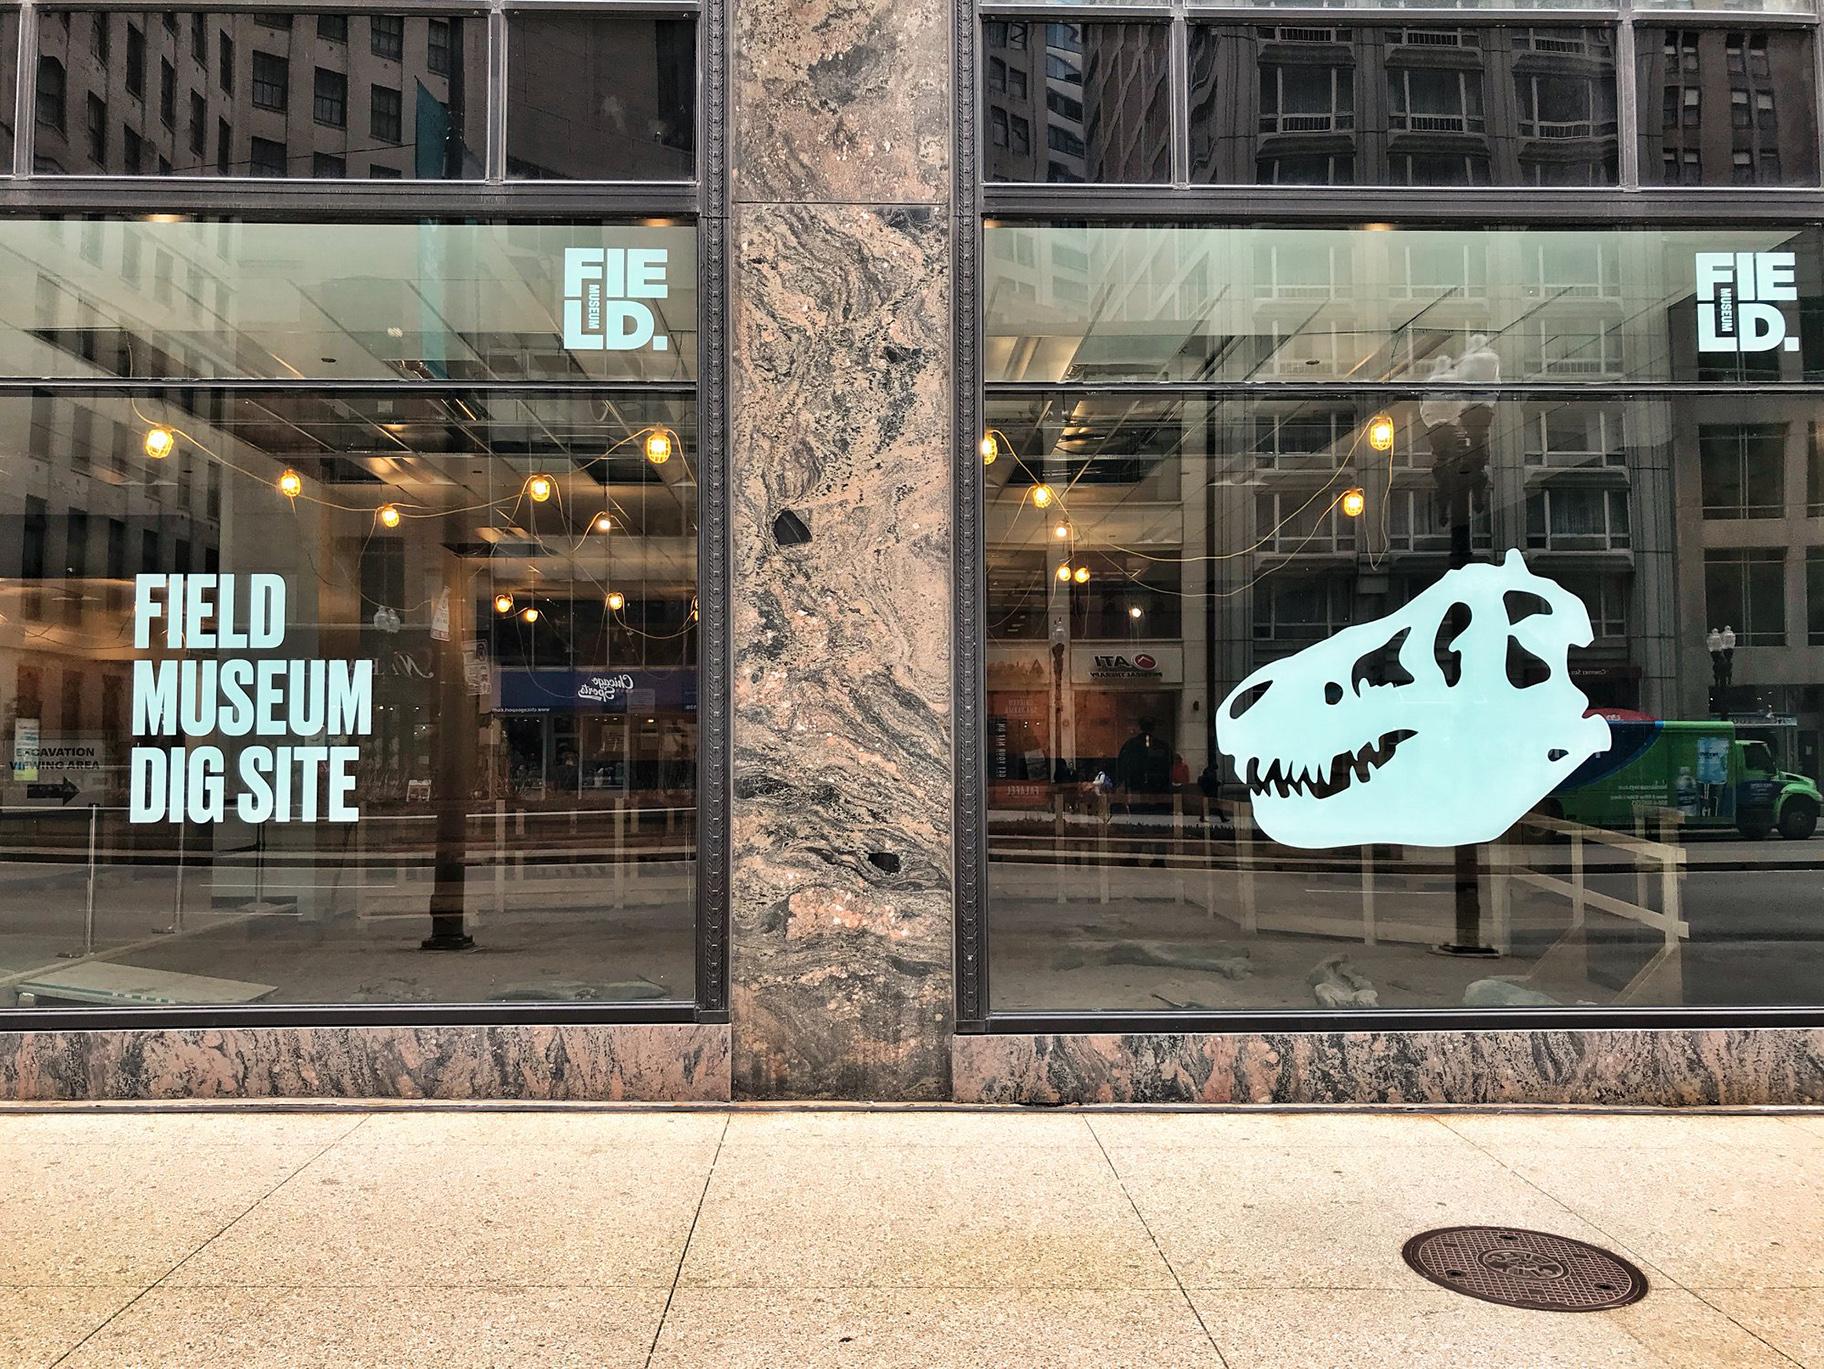 The Field Museum’s new pop-up “Dig Site” (333 N. Michigan Ave.) aims to replicate a location where paleontologists might search for fossils. (Courtesy The Field Museum)